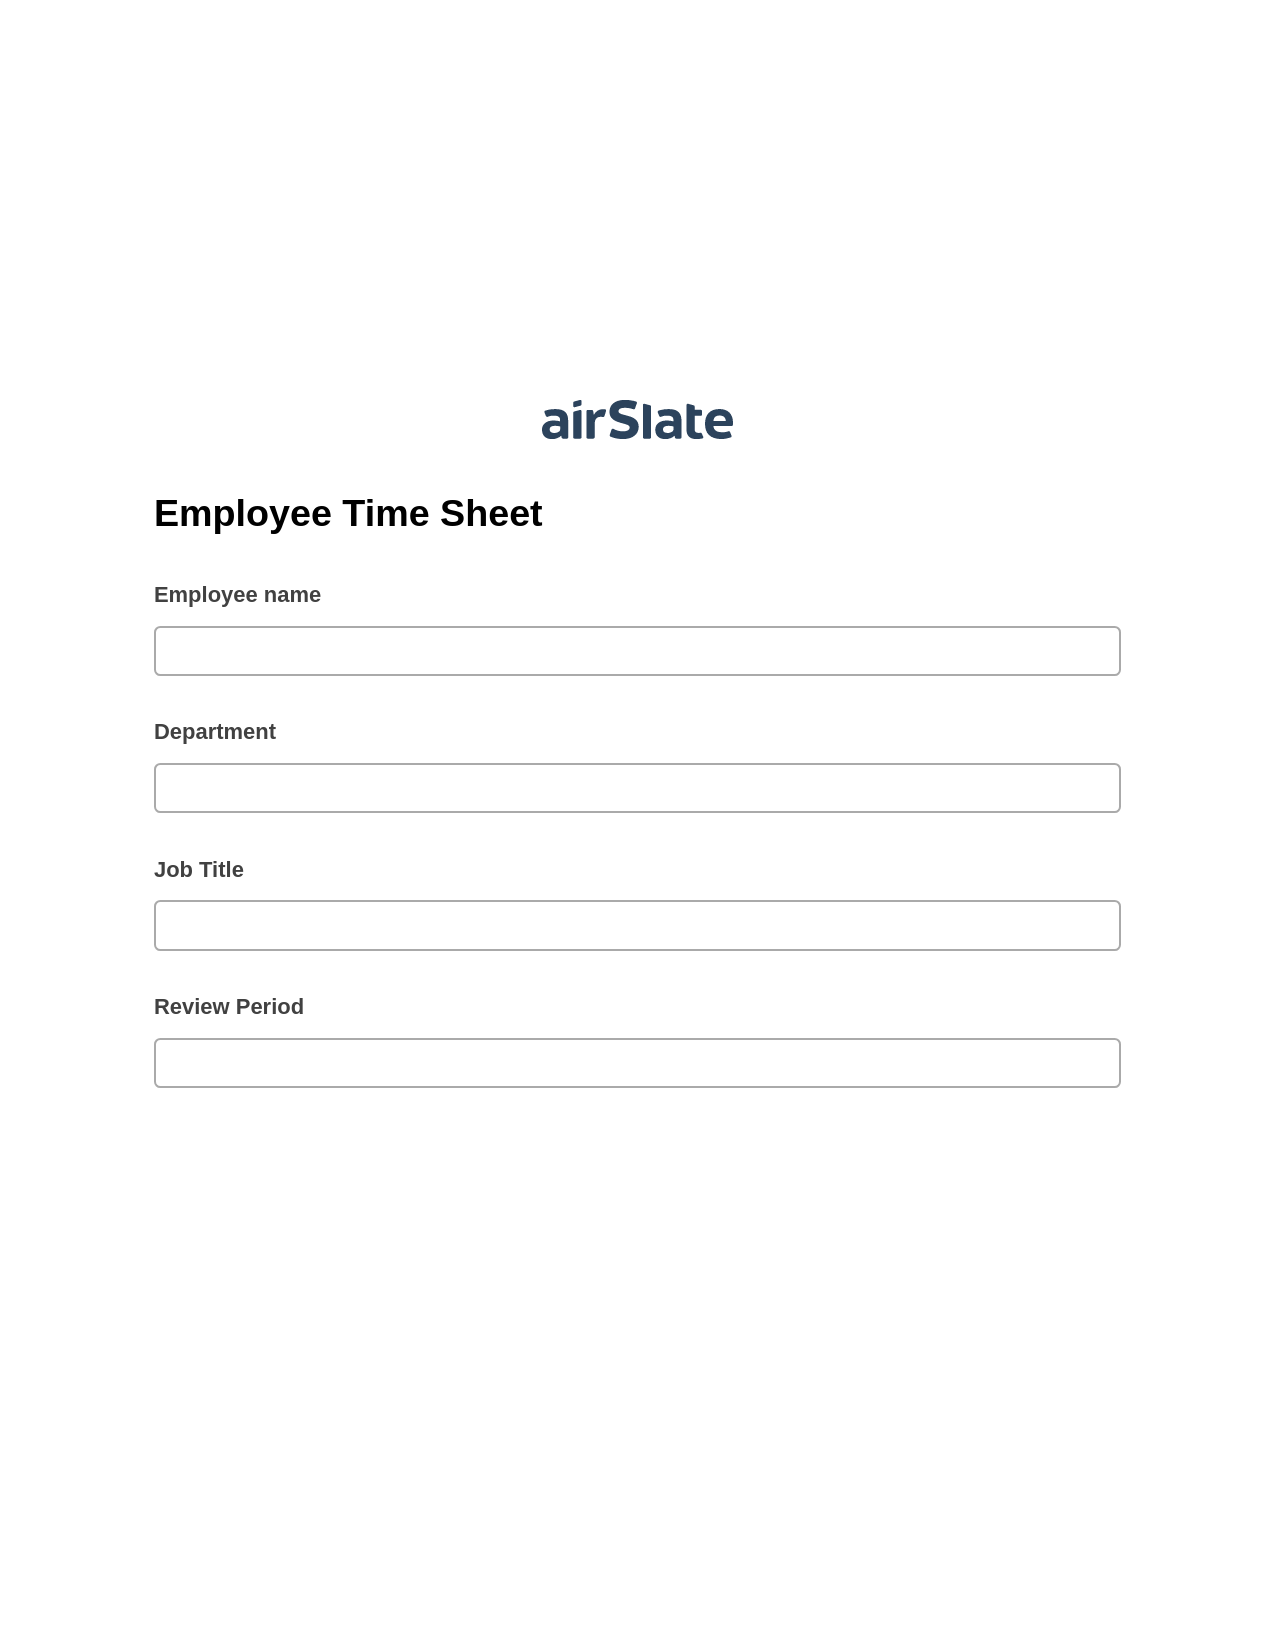 Multirole Employee Time Sheet Pre-fill from Salesforce Records with SOQL Bot, Update MS Dynamics 365 Record Bot, Slack Notification Postfinish Bot